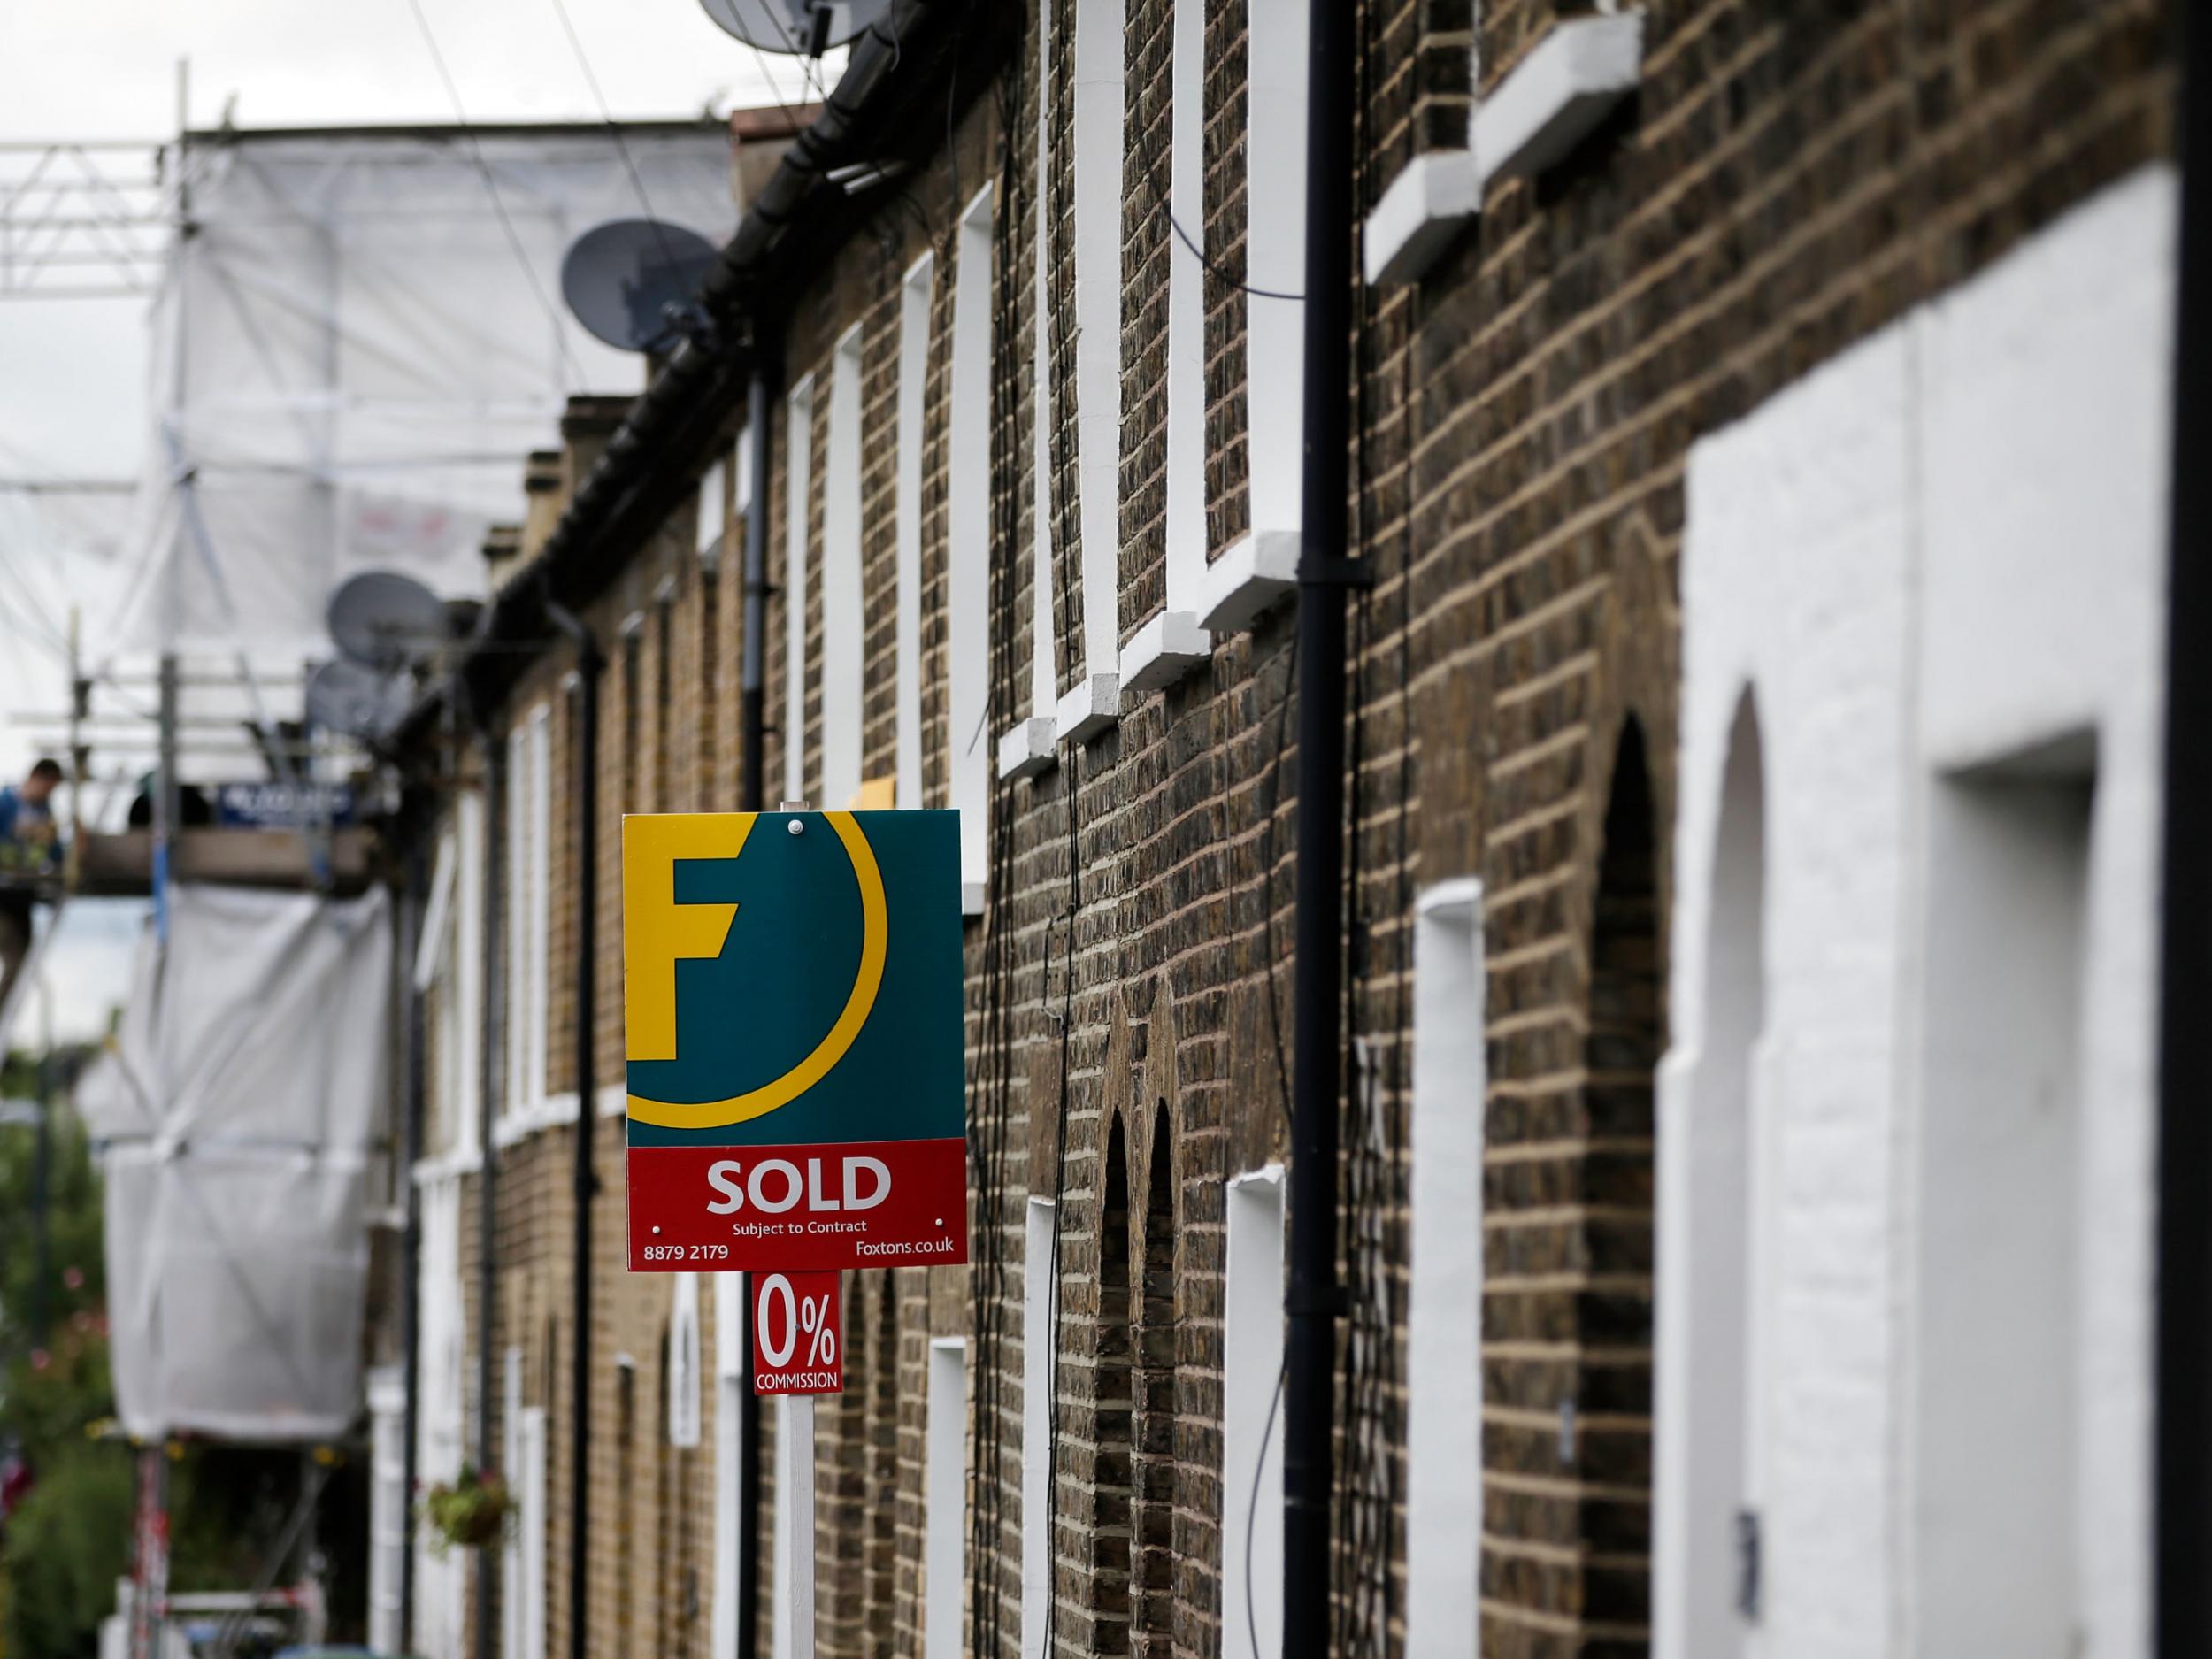 Across the whole of the UK annual house prices rose by 5.1 per cent